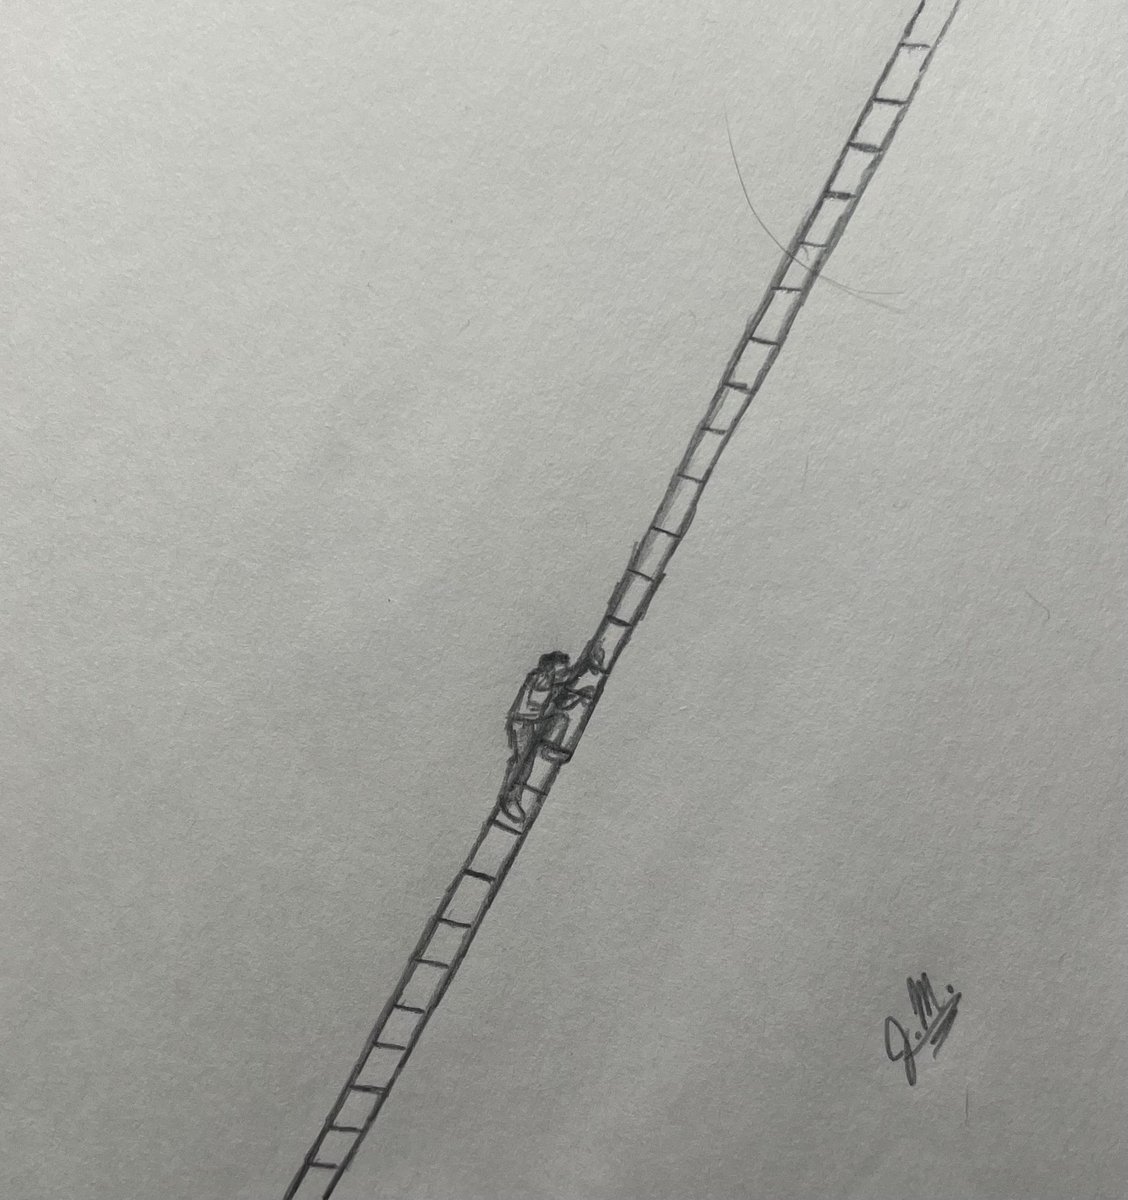 Ongoing

#pencildrawing #drawing #draw #pencilsketch #sketching #sketch #sketchdrawing #sketchbook #pencilart #pencilartist #art #artist #artistsoftwitter #sketchart #sketchartist #illustration #illustrationartist #ladder #ongoing #endless #simpleart #Surrealism #surrealart